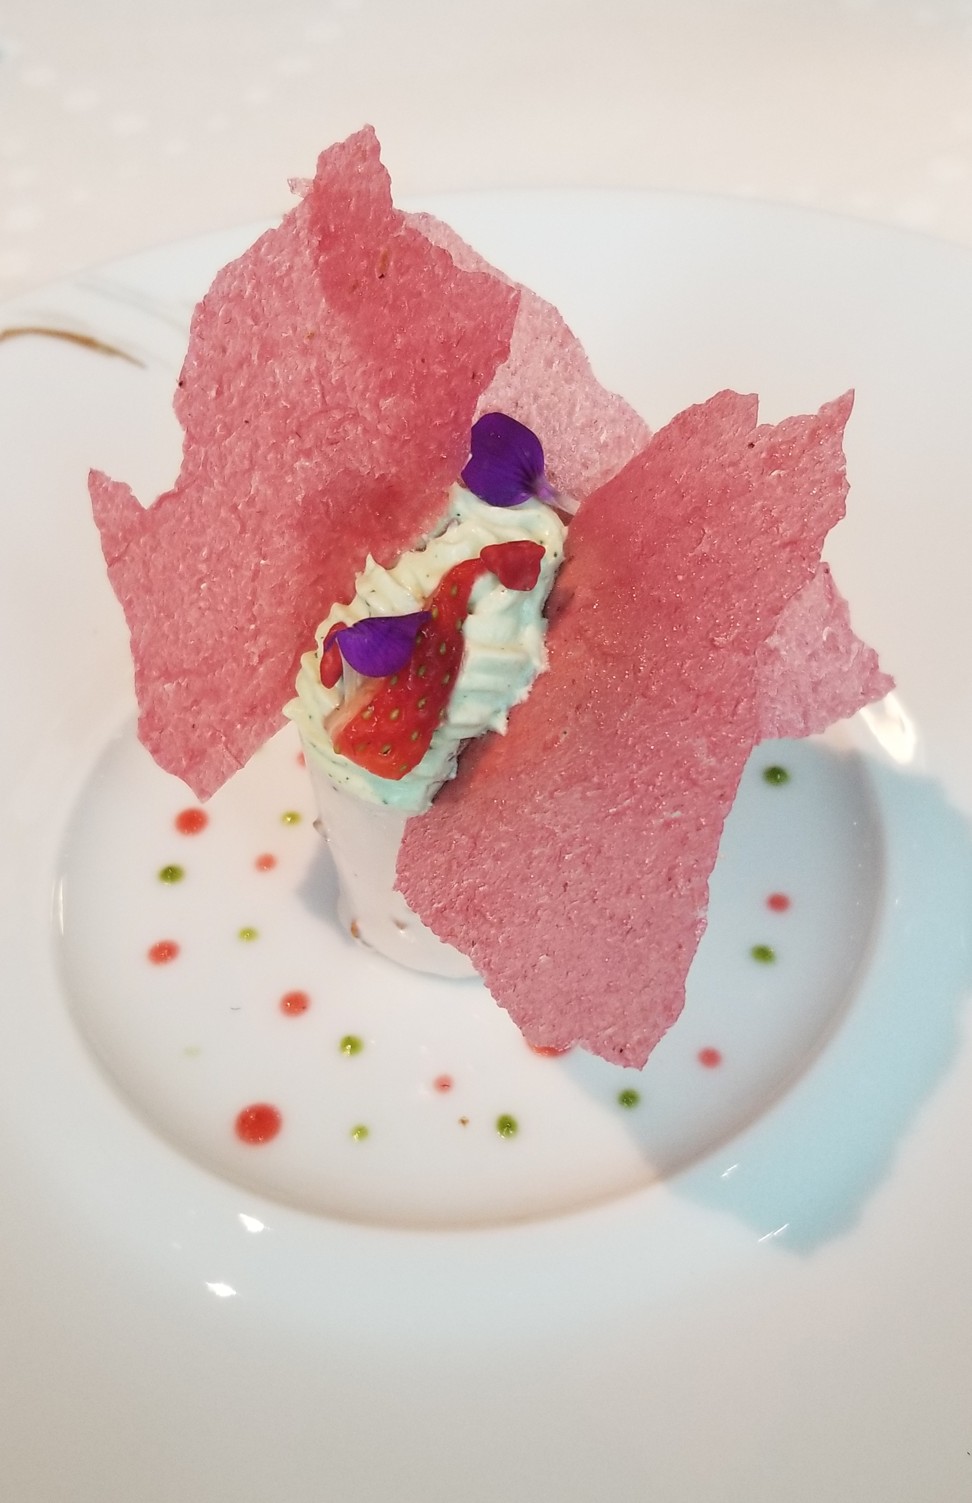 Strawberry roulade, with basil Chantilly and green apple sorbet, served at L’Envol